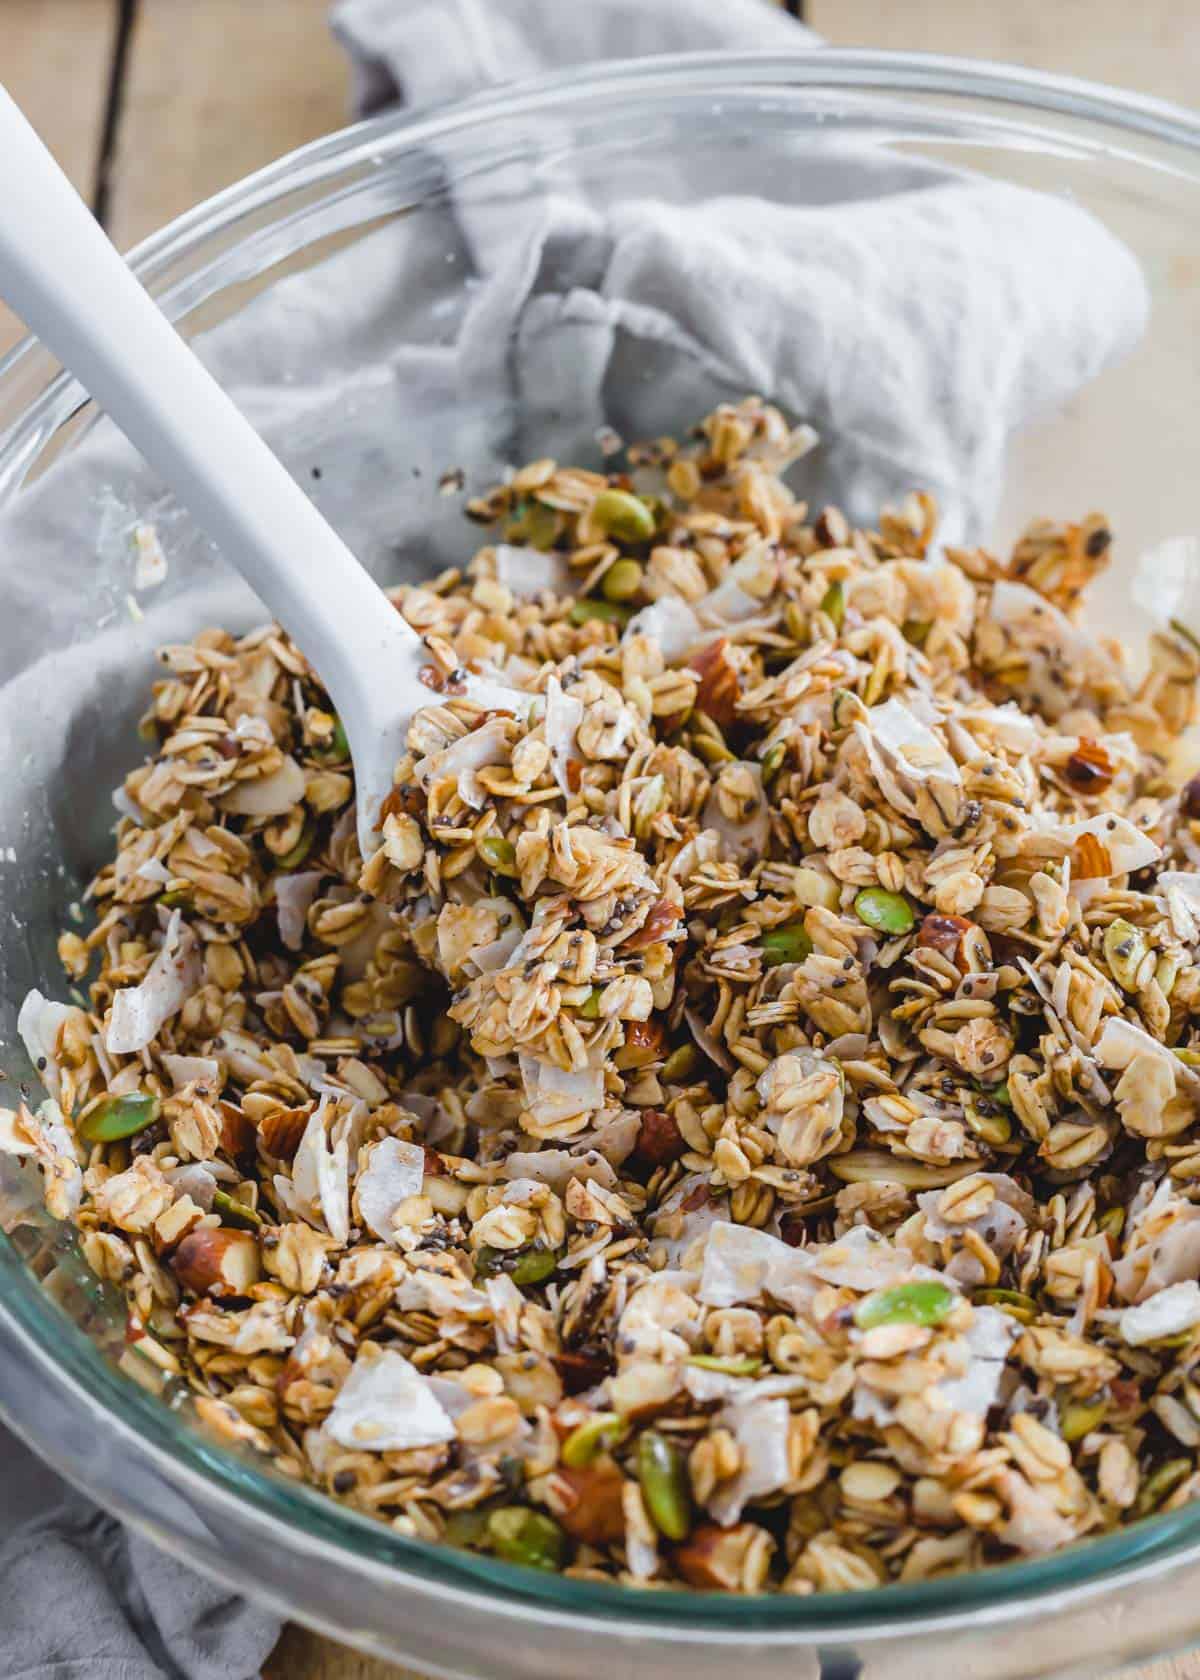 Oats, almonds, coconut, pepitas and chia seeds tossed with wet ingredients to make granola in a glass bowl.